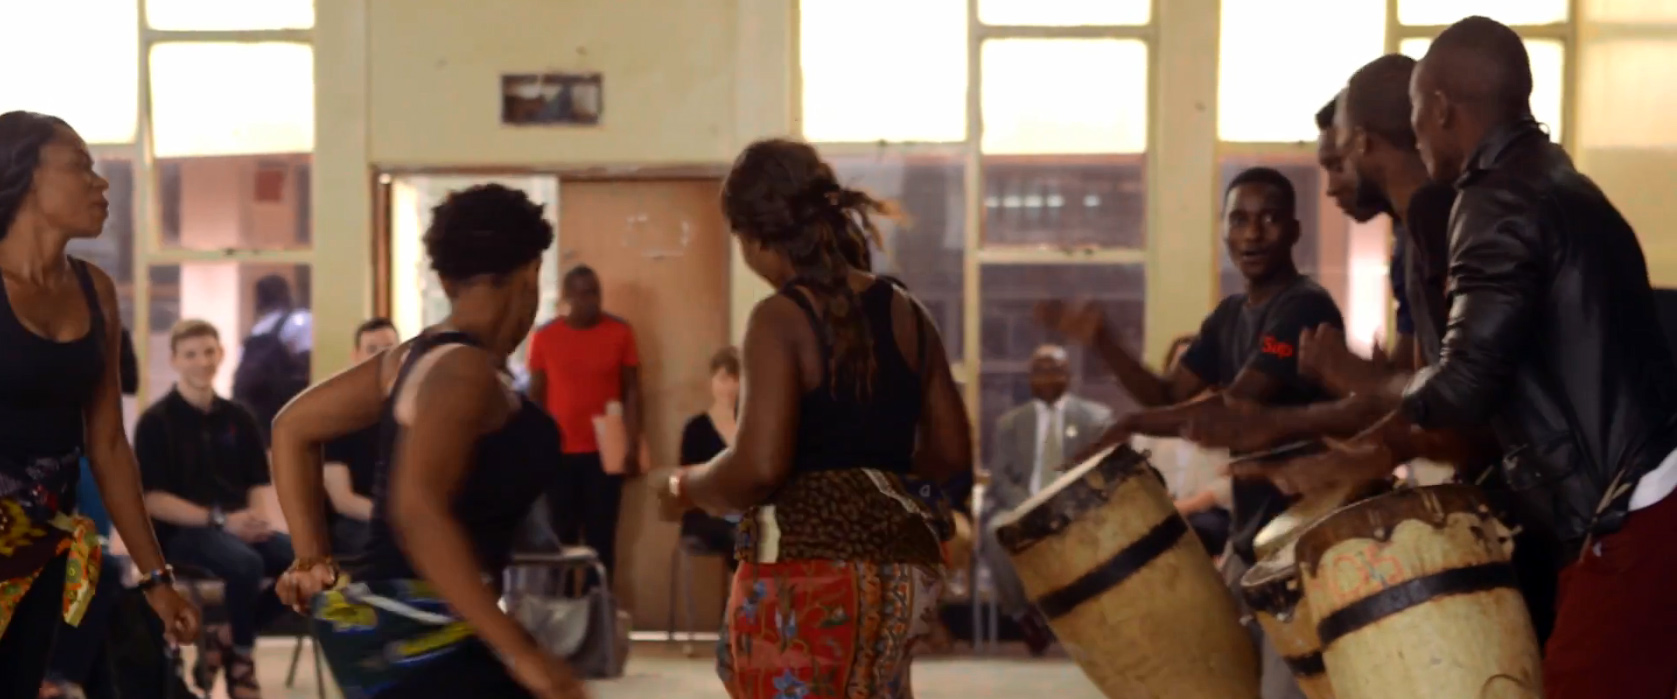 Dancers and drummers in Zambia perform